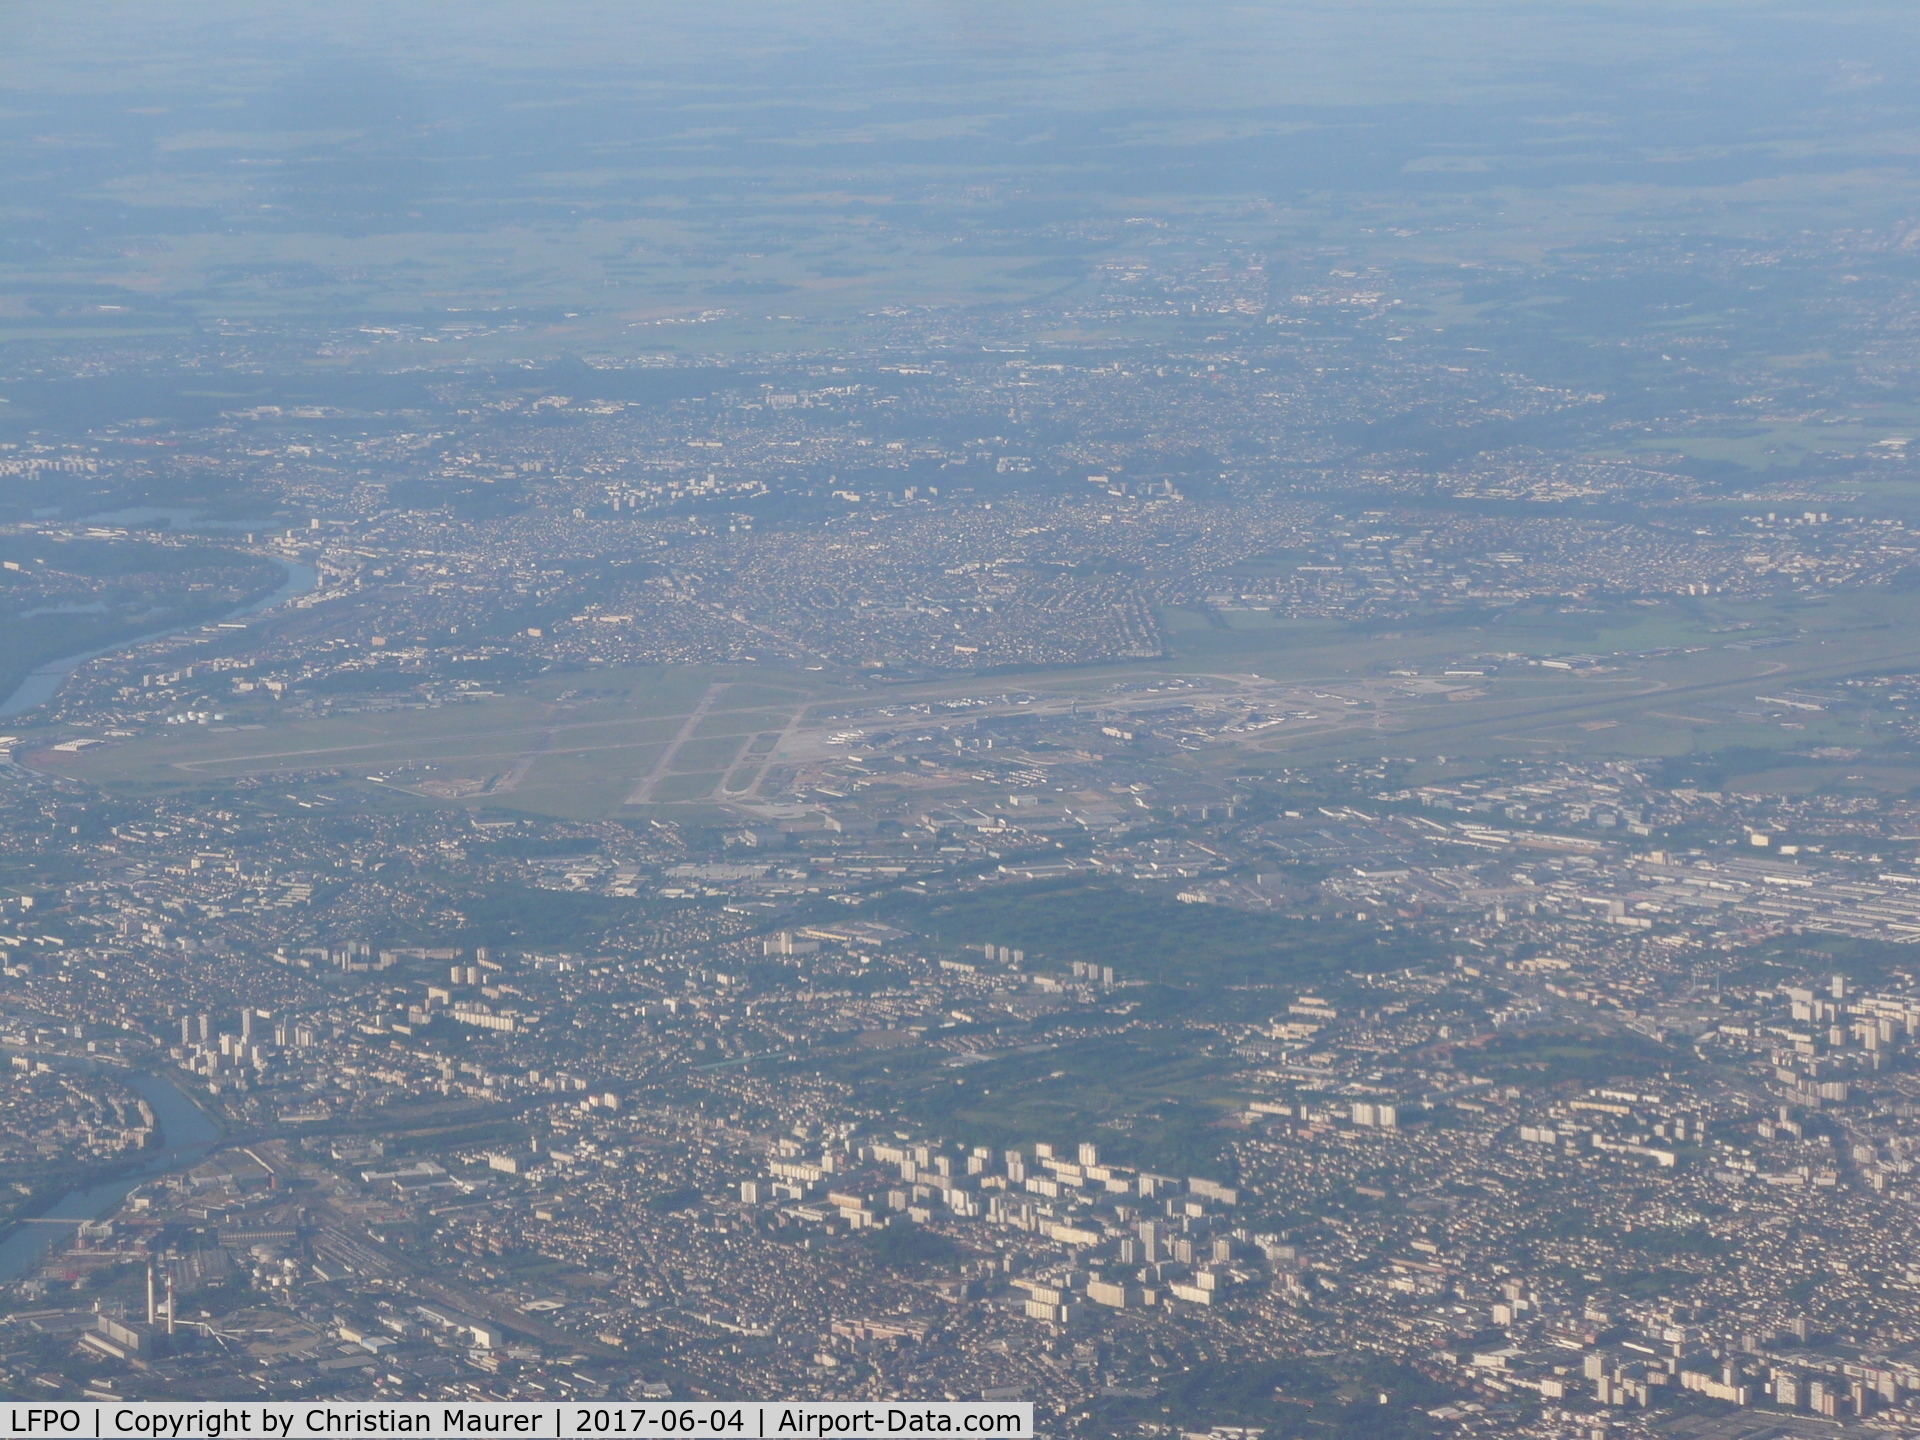 Paris Orly Airport, Orly (near Paris) France (LFPO) - Taken from a Boeing 767 DL 228